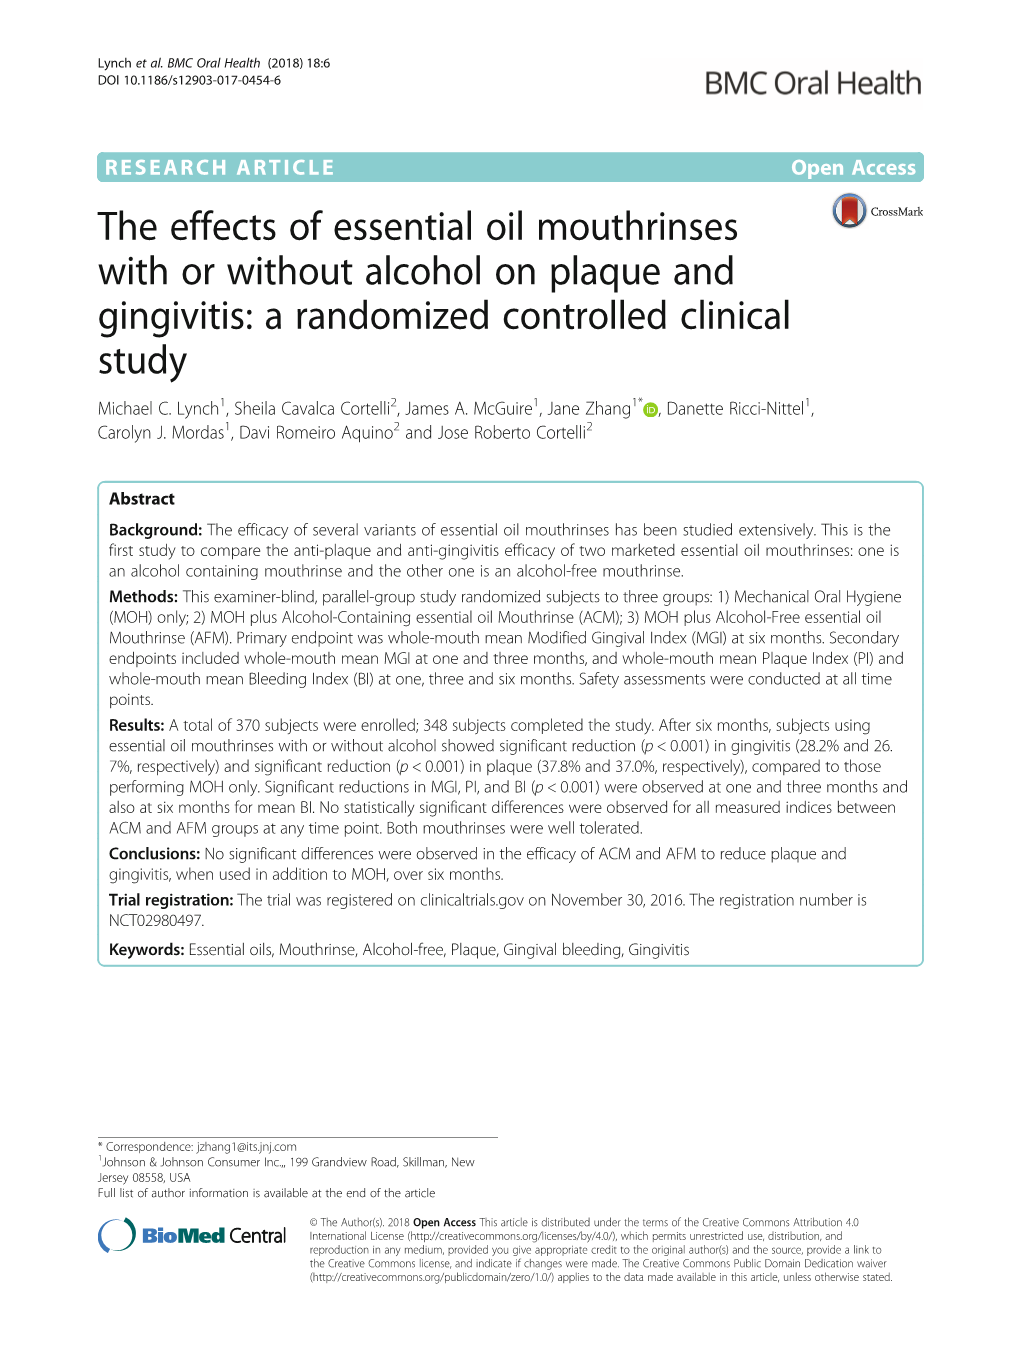 The Effects of Essential Oil Mouthrinses with Or Without Alcohol on Plaque and Gingivitis: a Randomized Controlled Clinical Study Michael C